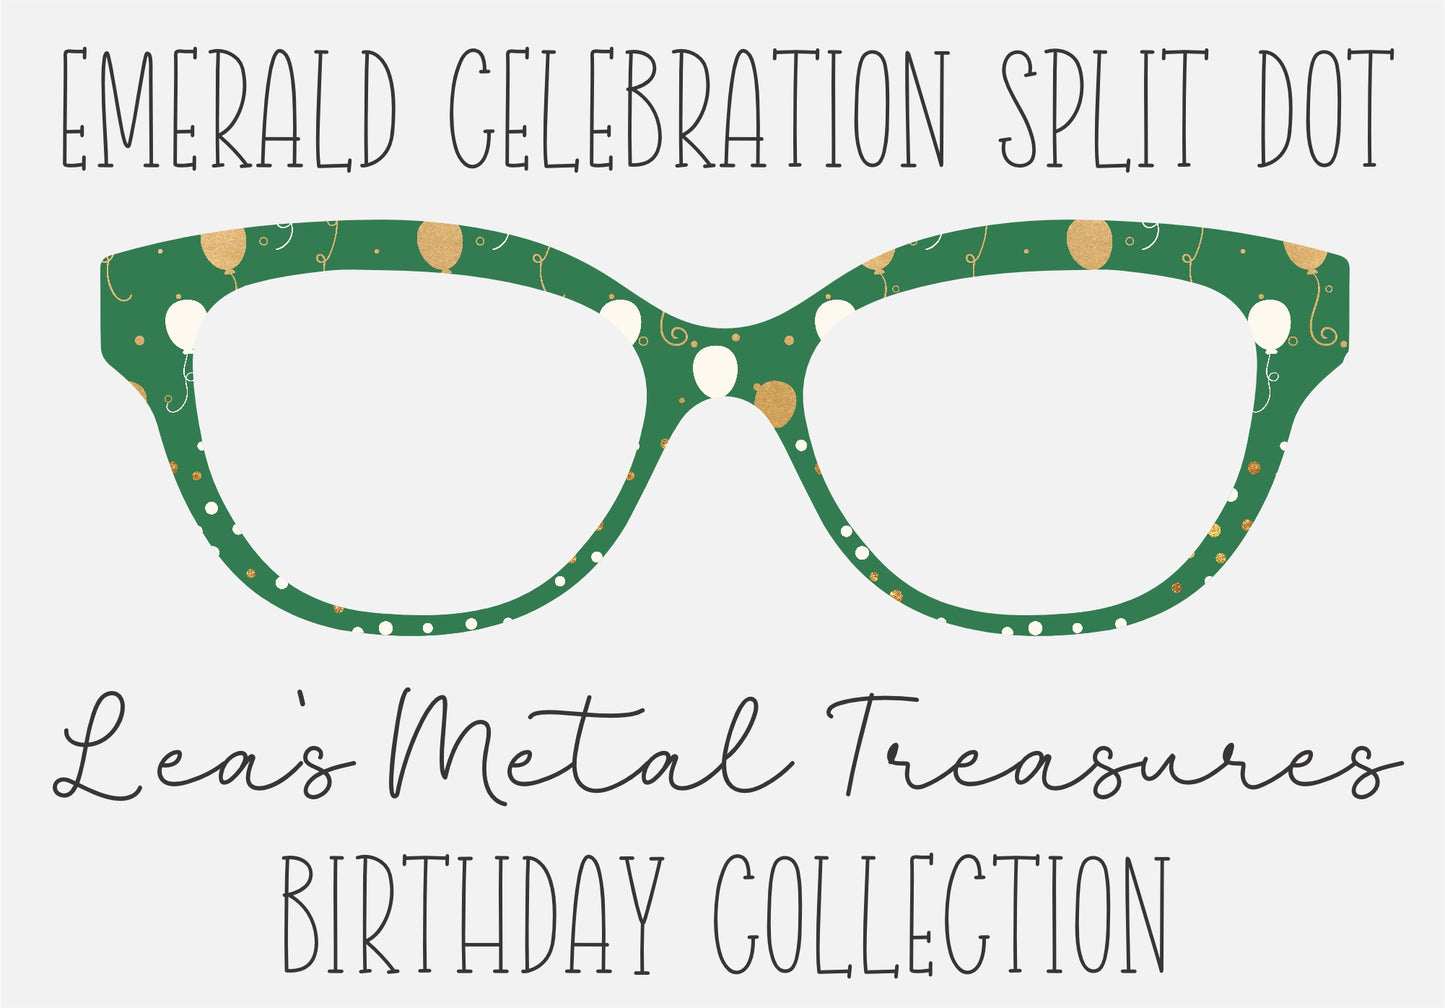 EMERALD CELEBRATION SPLIT DOT Eyewear Toppers COMES WITH MAGNETS